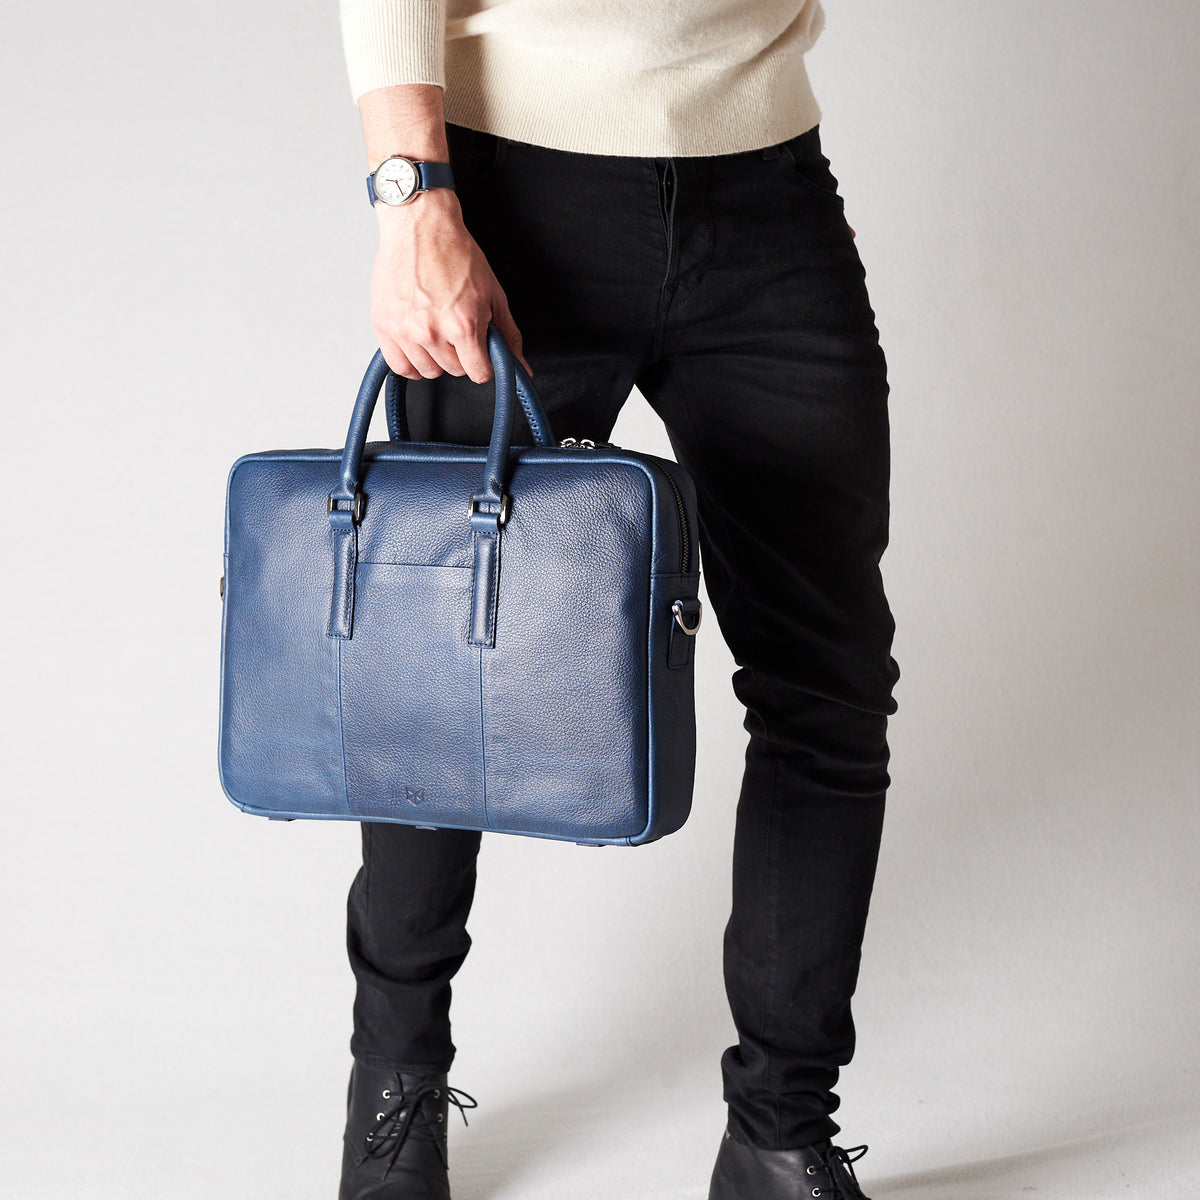 Style view, model holding bussiness document portfolio bag .Blue leather briefcase laptop bag for men. Gazeli laptop briefcase by Capra Leather.